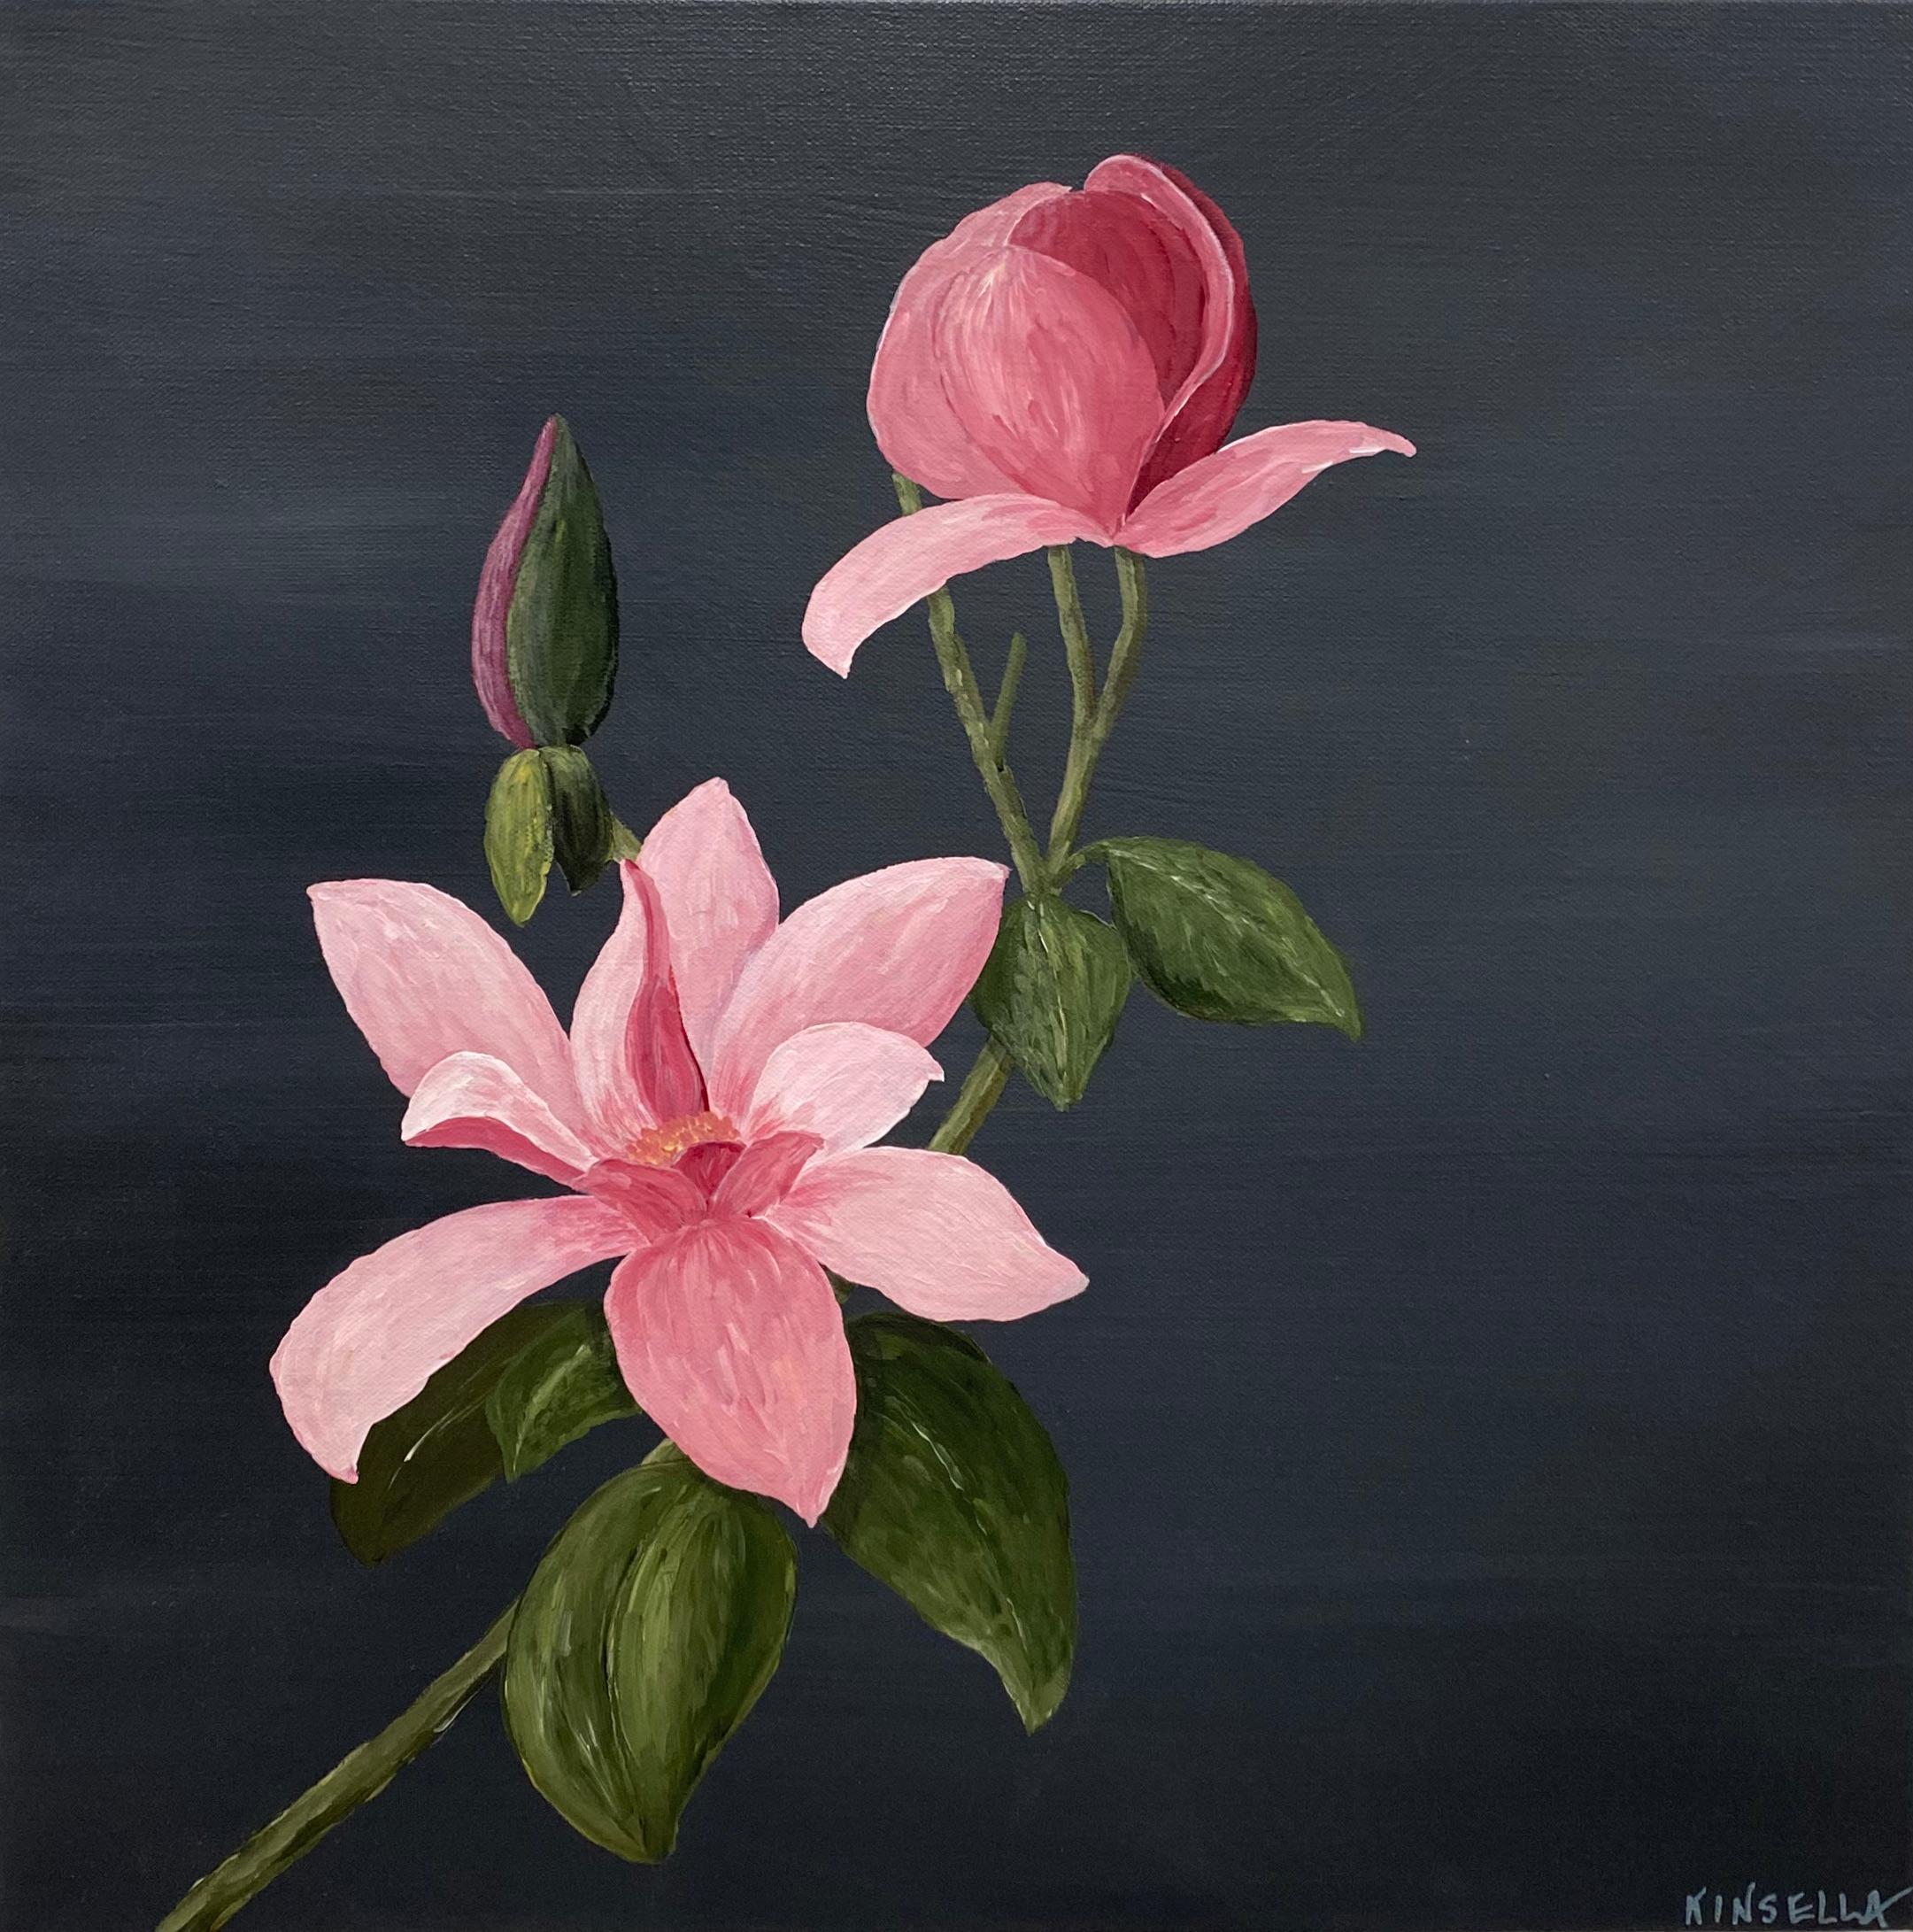 'Pretty in Pink' is a contemporary acrylic on canvas still-life painting created by American artist Susan Kinsella in 2020. Featuring a palette made of pink, gray-blue and green tones, the painting charms us with its minimalist treatment. Depicting